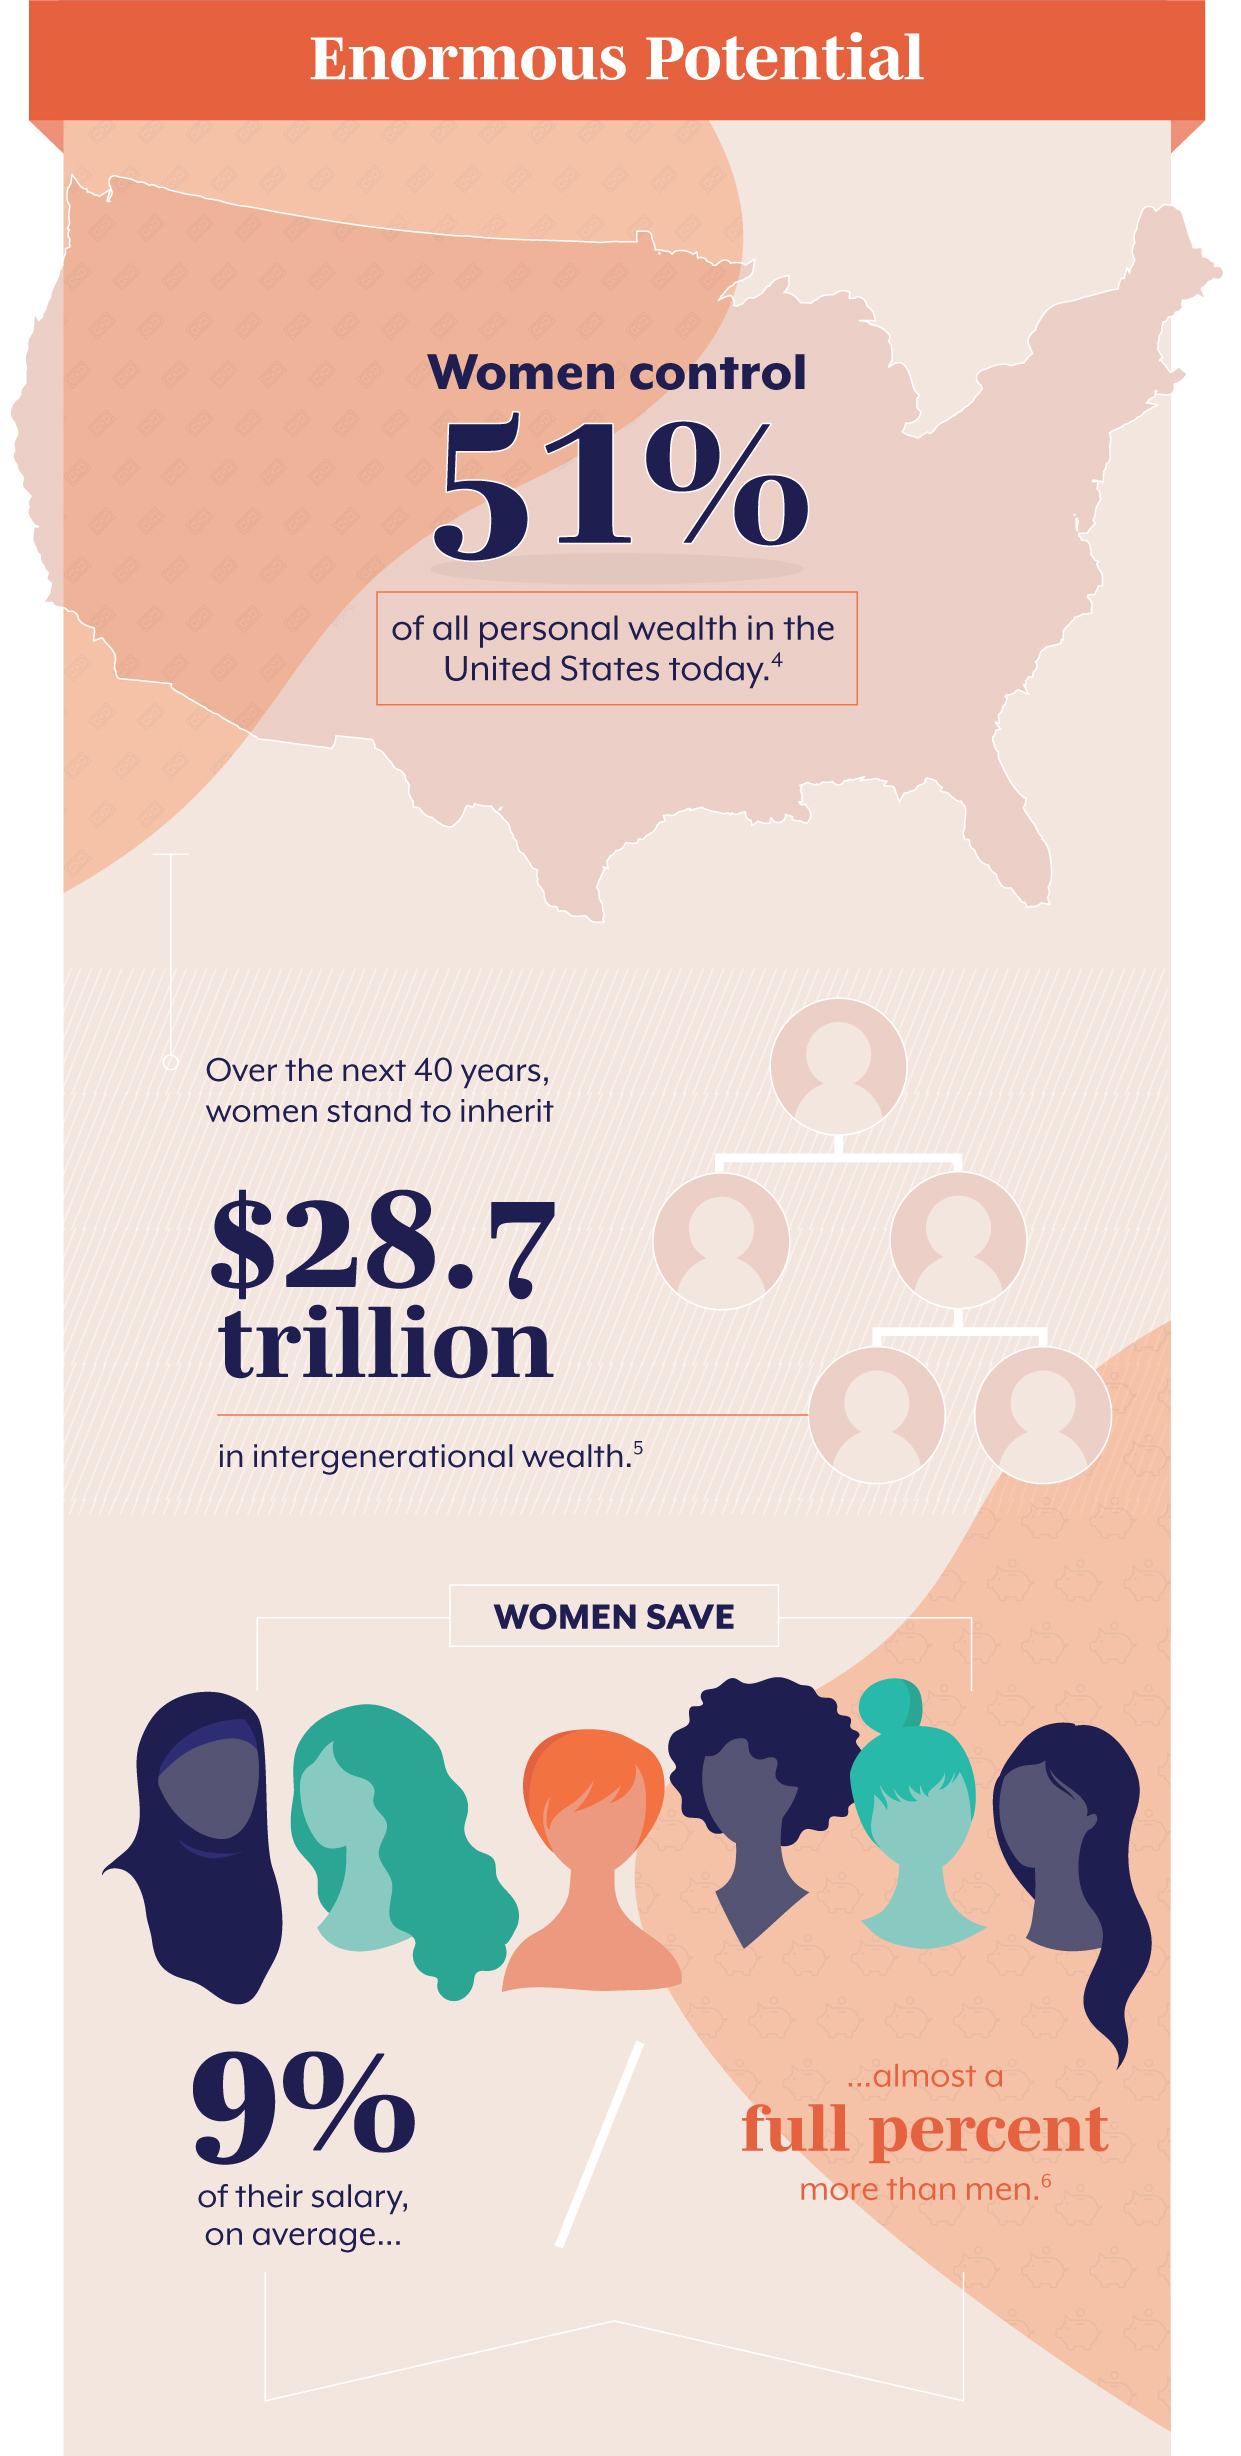 Enormous Potential The truth is, women wield a huge amount of influence over the economy, and their impact is only likely to grow. Women control 51% of all personal wealth in the United States today. (4) Over the next 40 years, women stand to inherit $28.7 trillion in intergenerational wealth. (5) On average, women save 9% of their salary. That’s almost a full percent higher than men. (6)